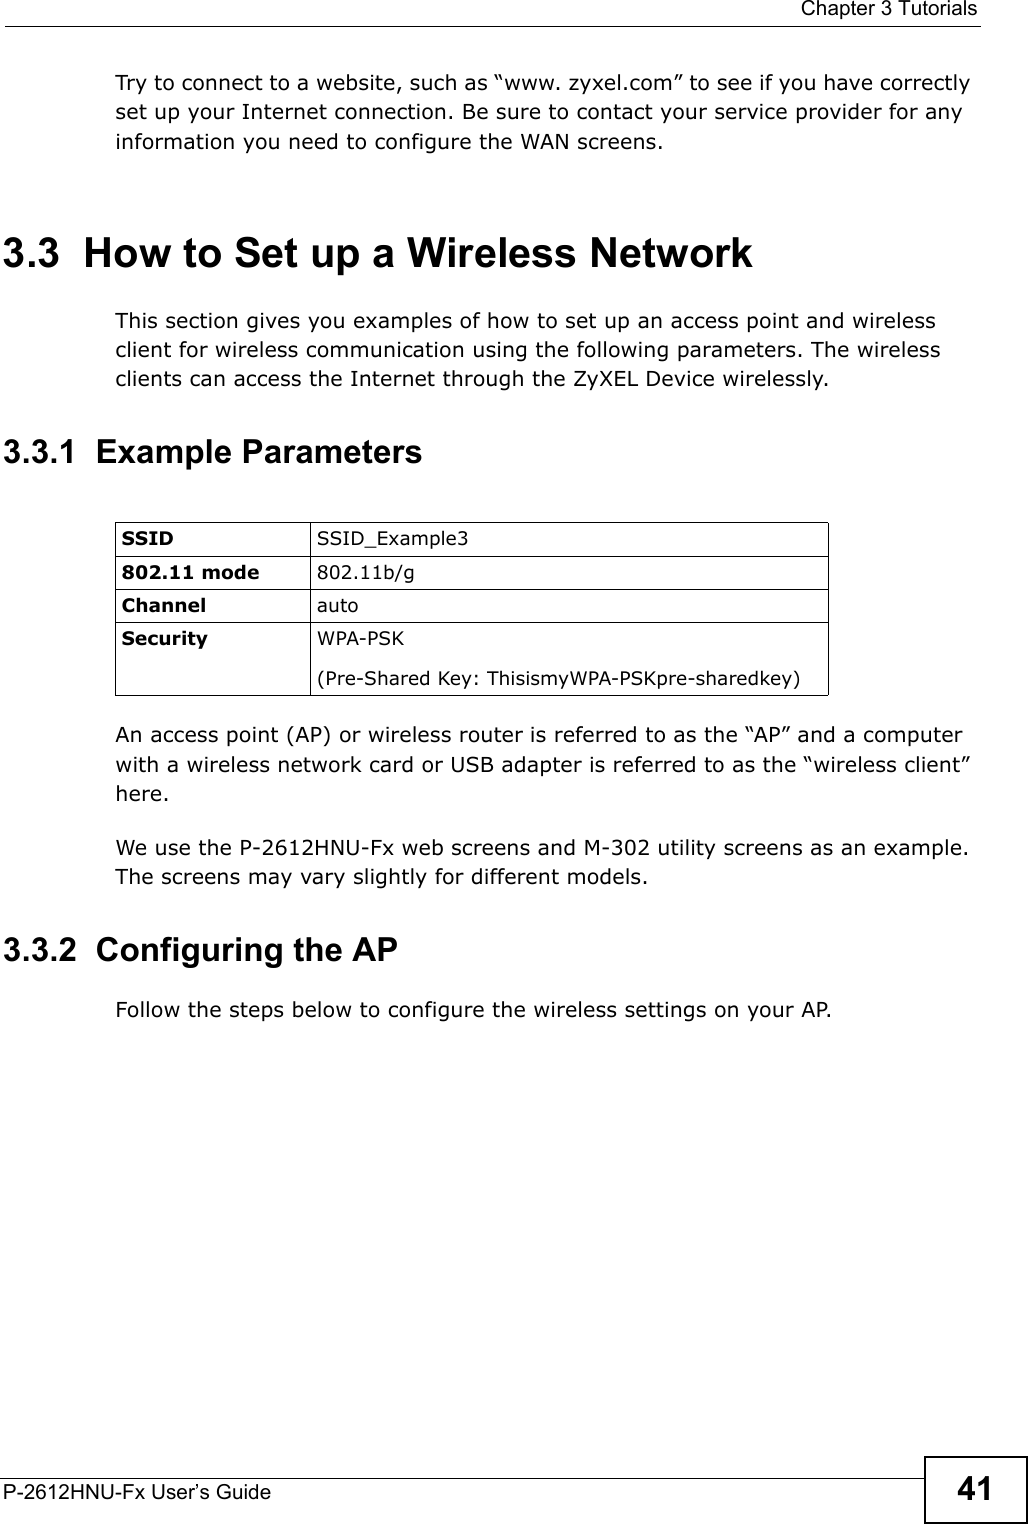  Chapter 3 TutorialsP-2612HNU-Fx User’s Guide 41Try to connect to a website, such as “www. zyxel.com” to see if you have correctlyset up your Internet connection. Be sure to contact your service provider for anyinformation you need to configure the WAN screens.3.3  How to Set up a Wireless NetworkThis section gives you examples of how to set up an access point and wireless client for wireless communication using the following parameters. The wireless clients can access the Internet through the ZyXEL Device wirelessly.3.3.1  Example ParametersAn access point (AP) or wireless router is referred to as the “AP” and a computer with a wireless network card or USB adapter is referred to as the “wireless client” here.We use the P-2612HNU-Fx web screens and M-302 utility screens as an example. The screens may vary slightly for different models.3.3.2  Configuring the APFollow the steps below to configure the wireless settings on your AP.SSID SSID_Example3802.11 mode 802.11b/gChannel autoSecurity WPA-PSK(Pre-Shared Key: ThisismyWPA-PSKpre-sharedkey)